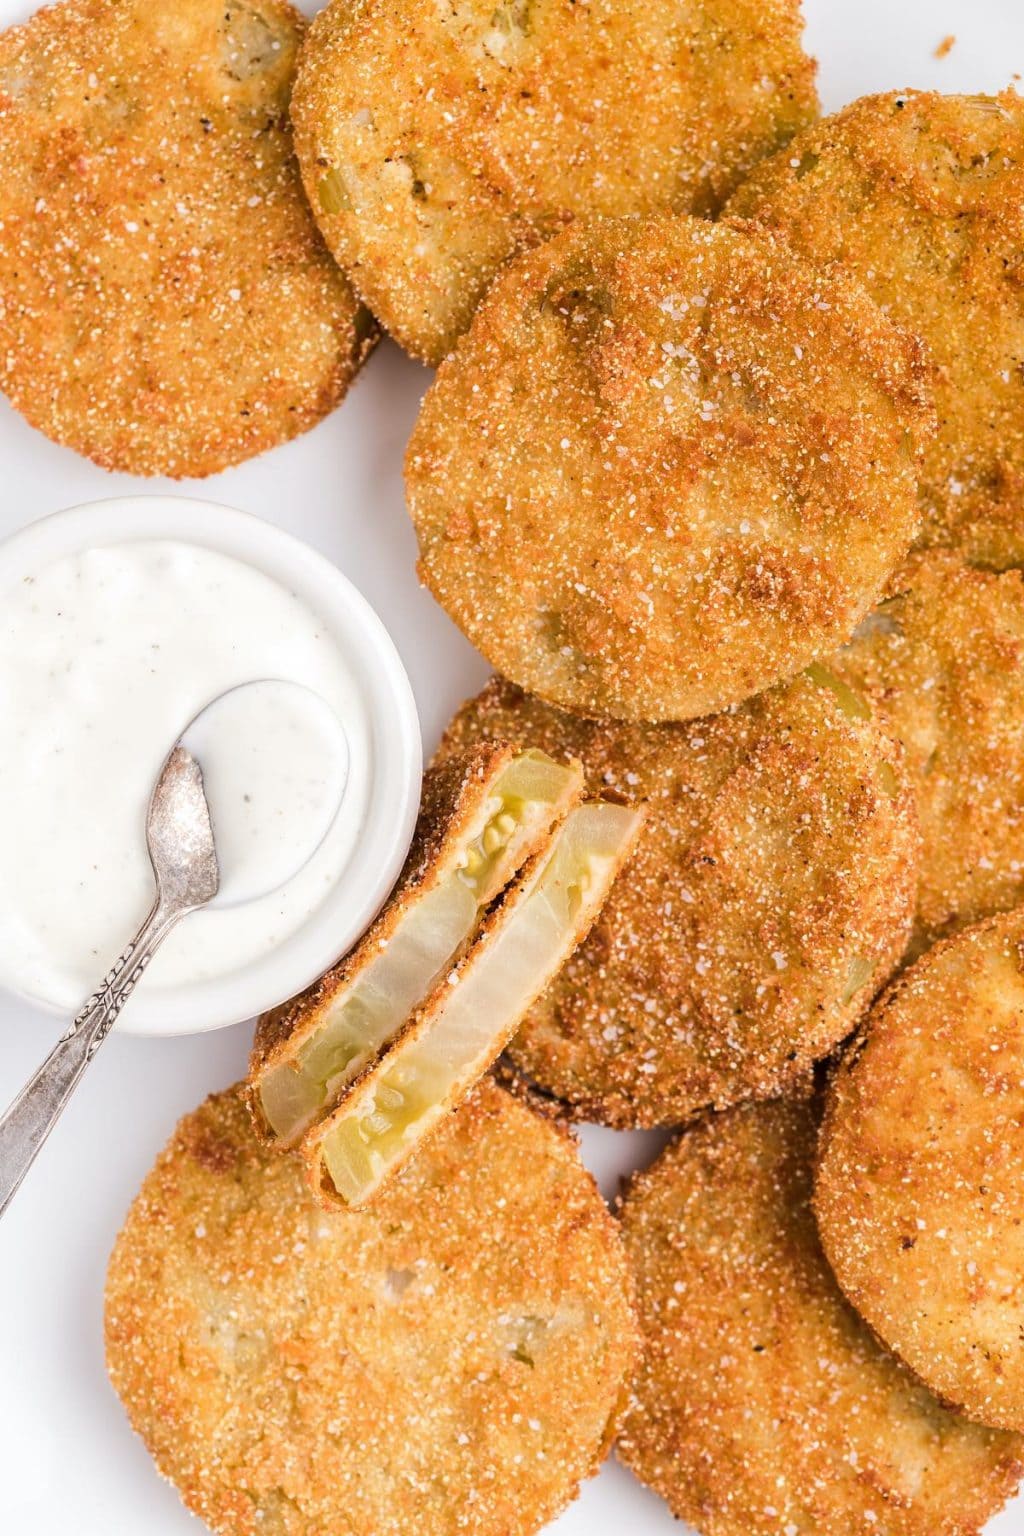 Fried Green Tomatoes (A Southern Classic Recipe) - Princess Pinky Girl